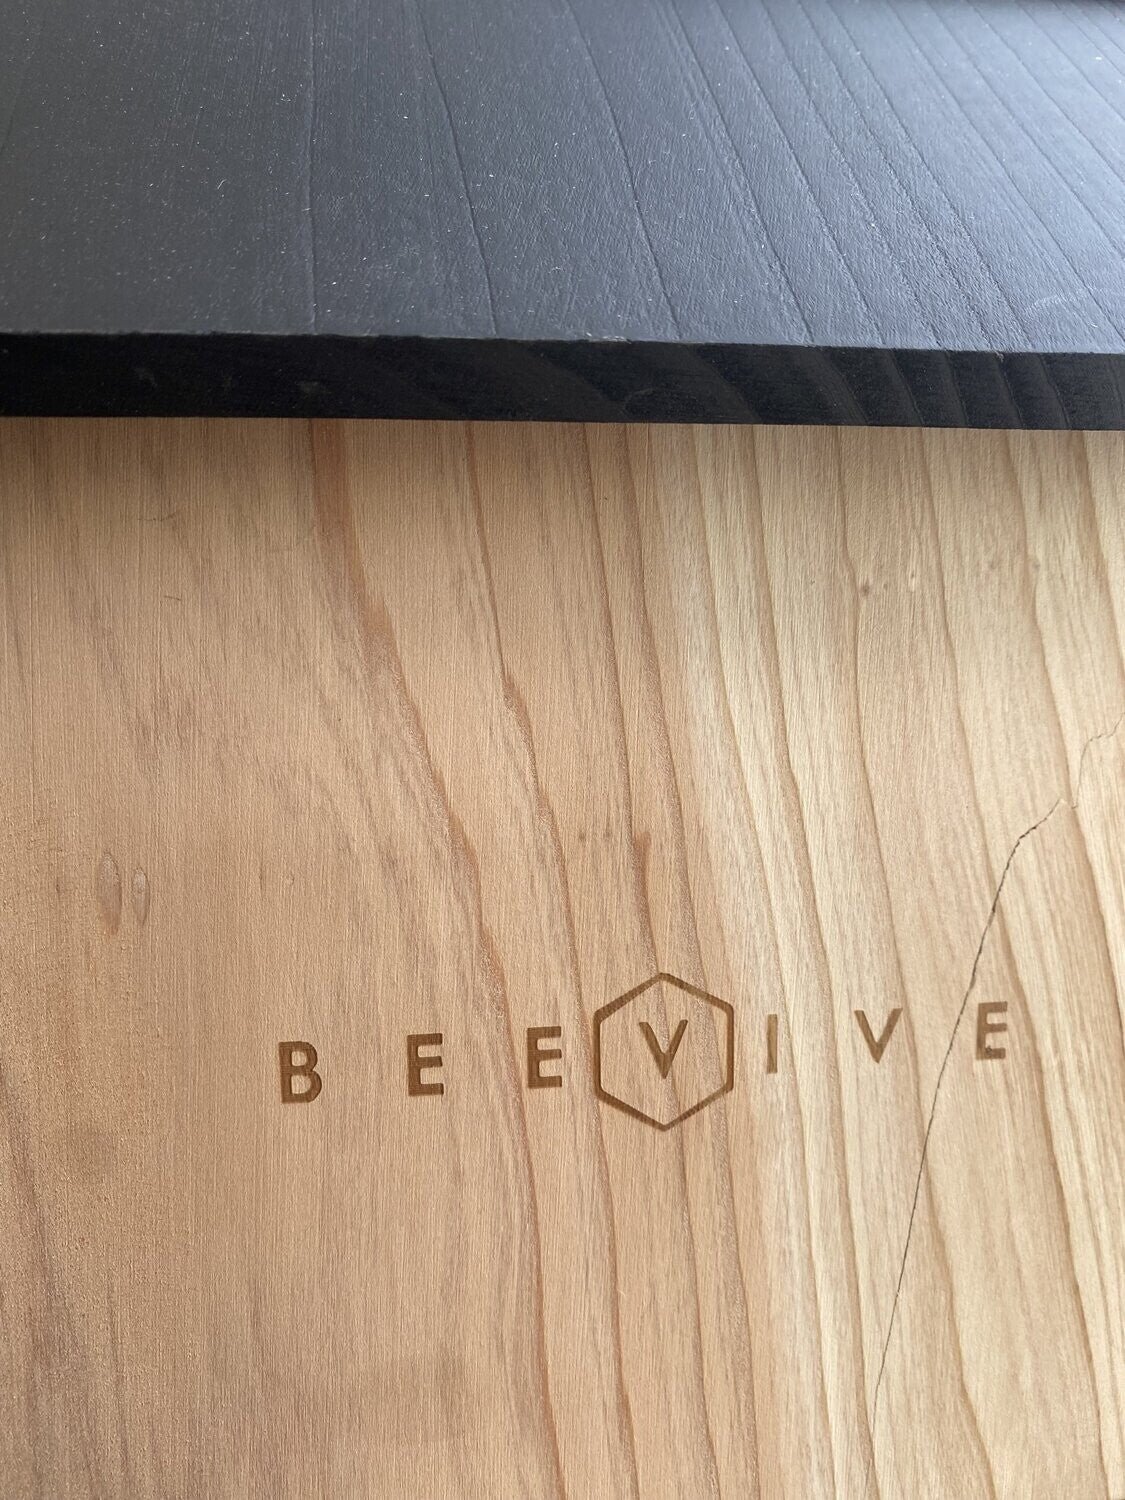 side of non perfect bee hotel 2.0 showing scratch on wood next to beevive.com logo